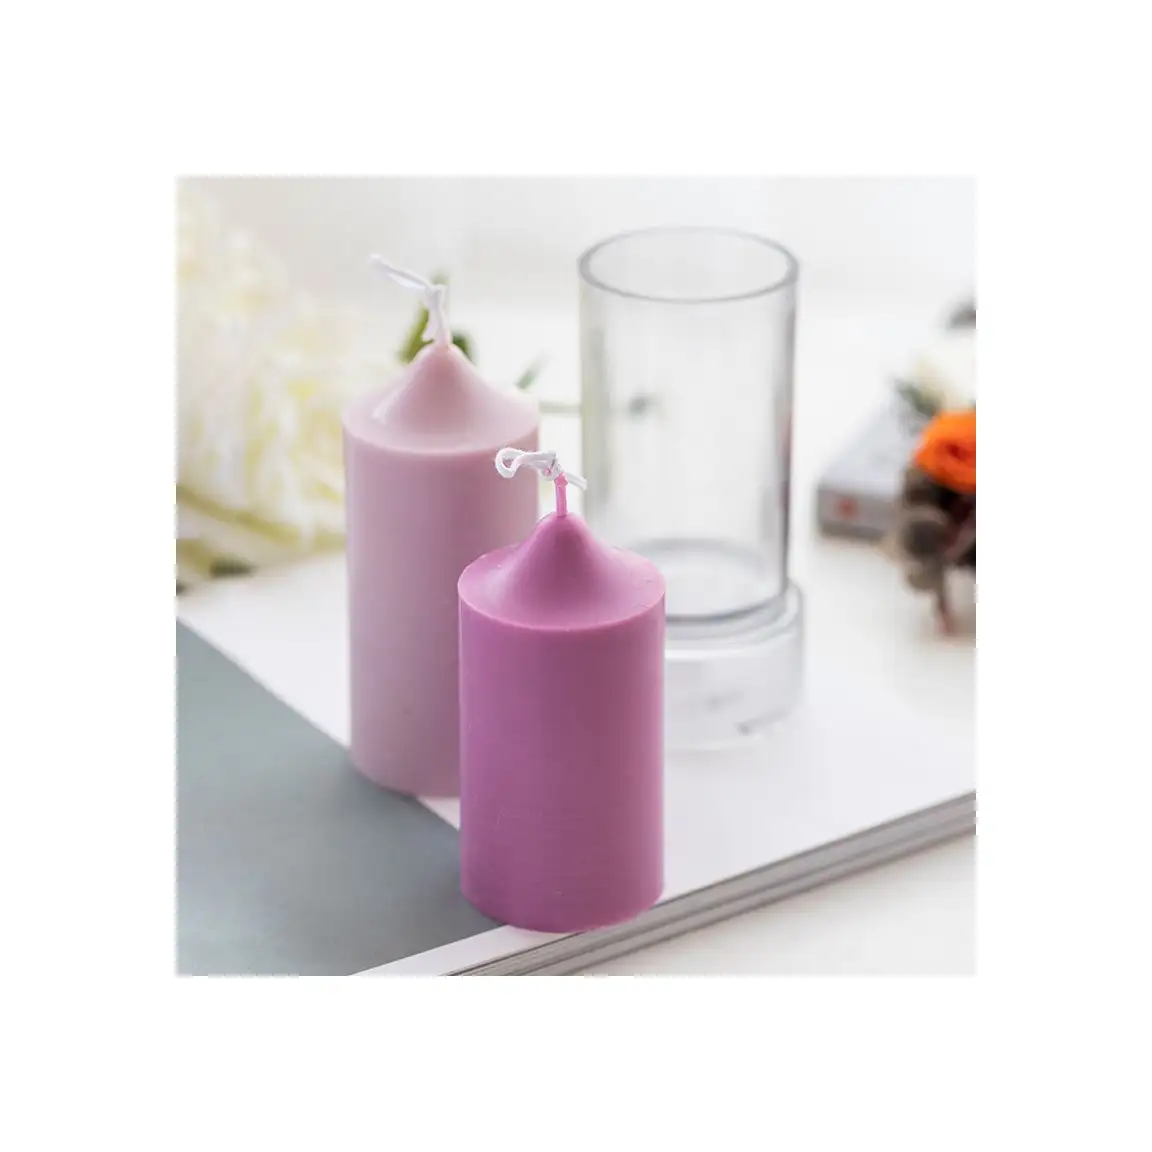 Classic home Decor Preserving Flower Luxury 100% Natural soy wax in the shape of a cylindrical church luxury Scented Candles